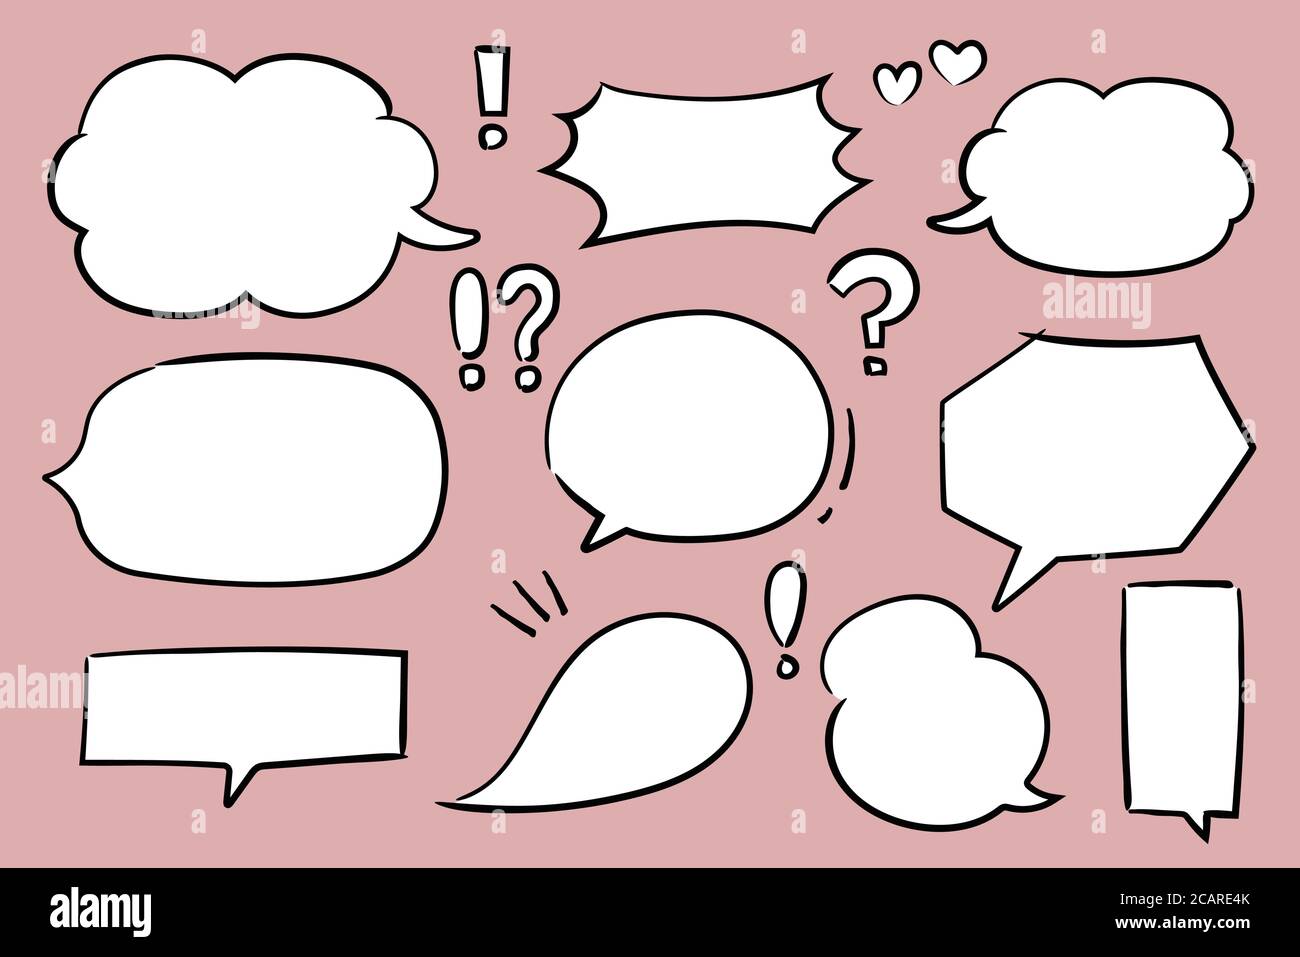 Hand drawn set of speech bubbles. Vector illustration isolated on pink background. Stock Vector